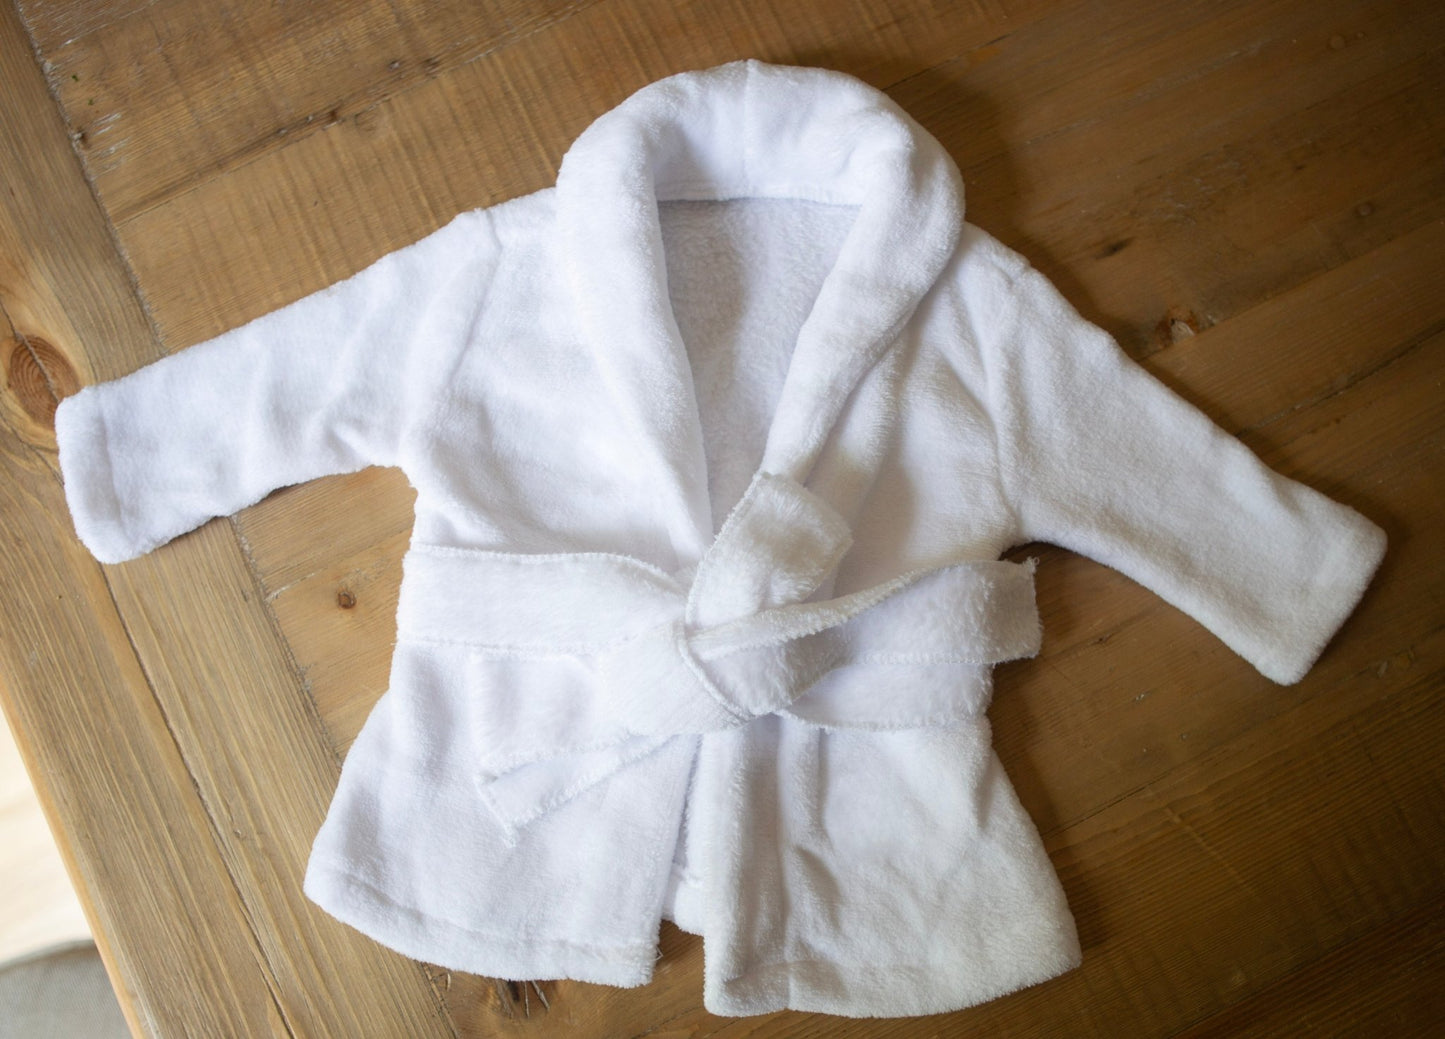 Load image into Gallery viewer, Newborn Photo Prop Robe and Towel Set - White or Pink - Cheerful Lane
